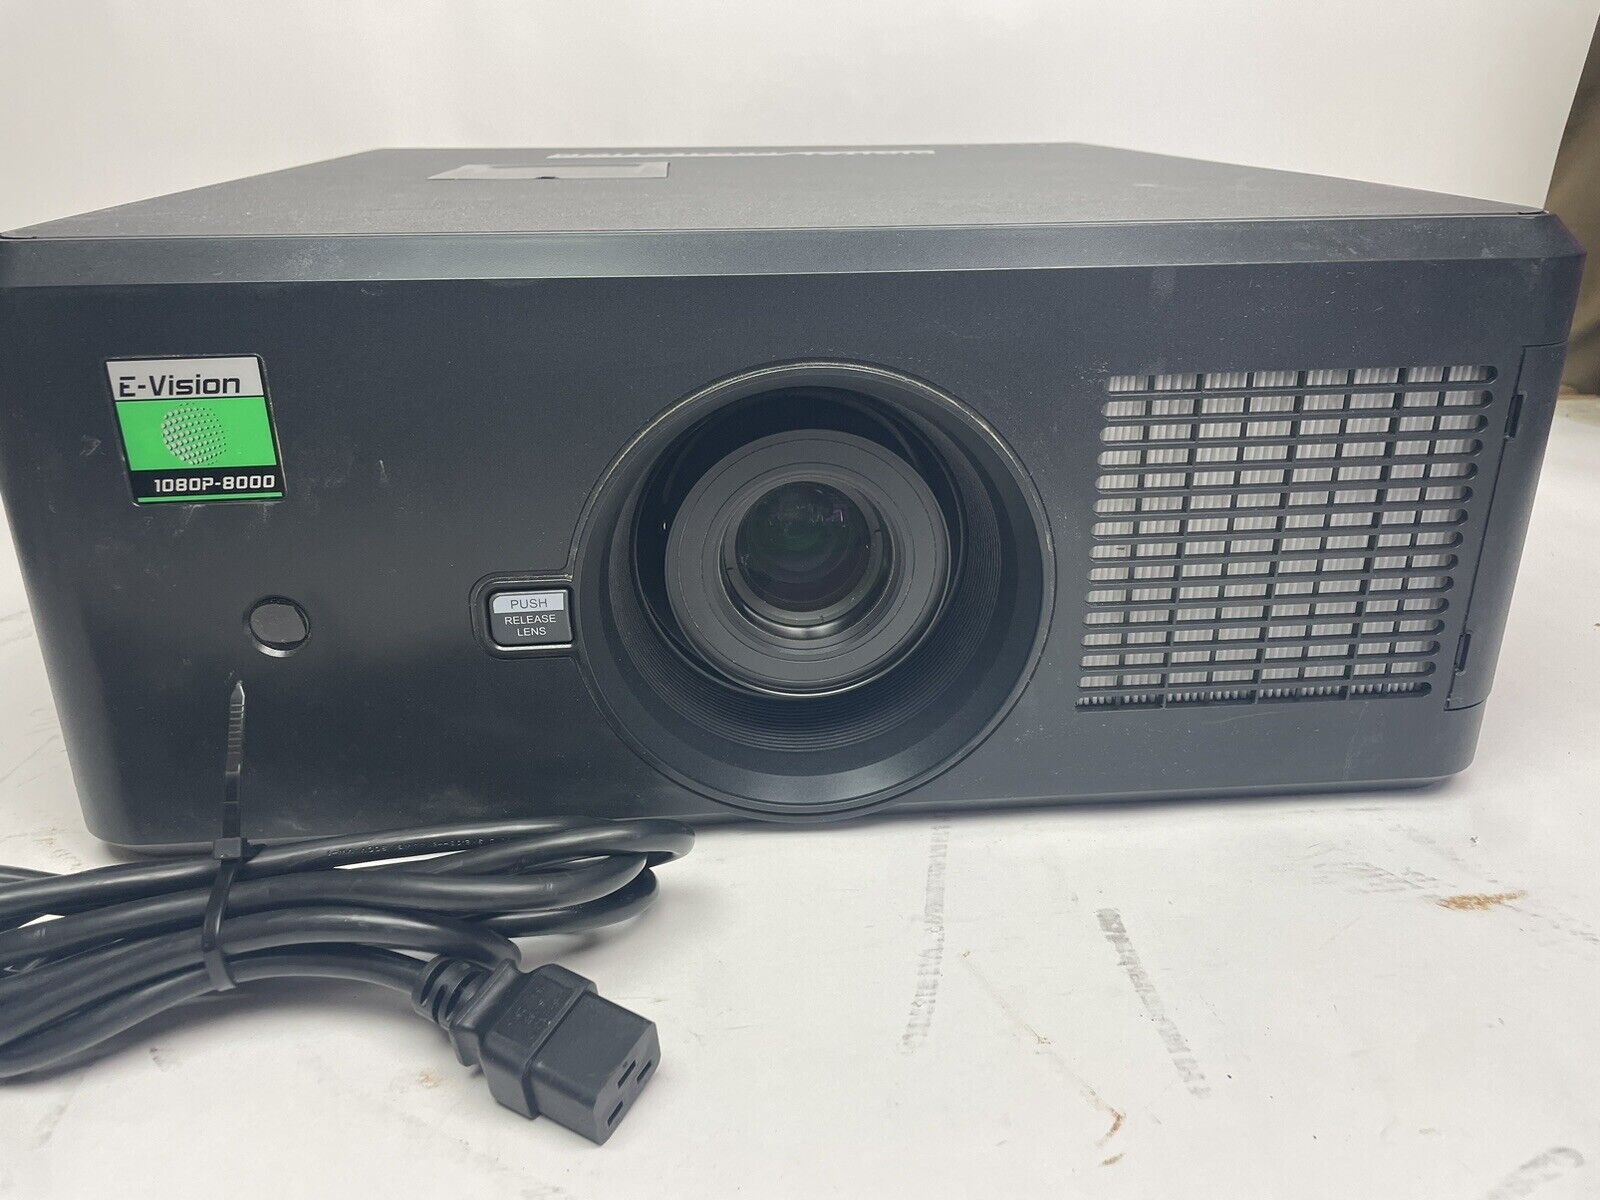 Digital Projection E-Vision+ 1080P-8000 Full HD HDMI DLP Projector *TESTED*